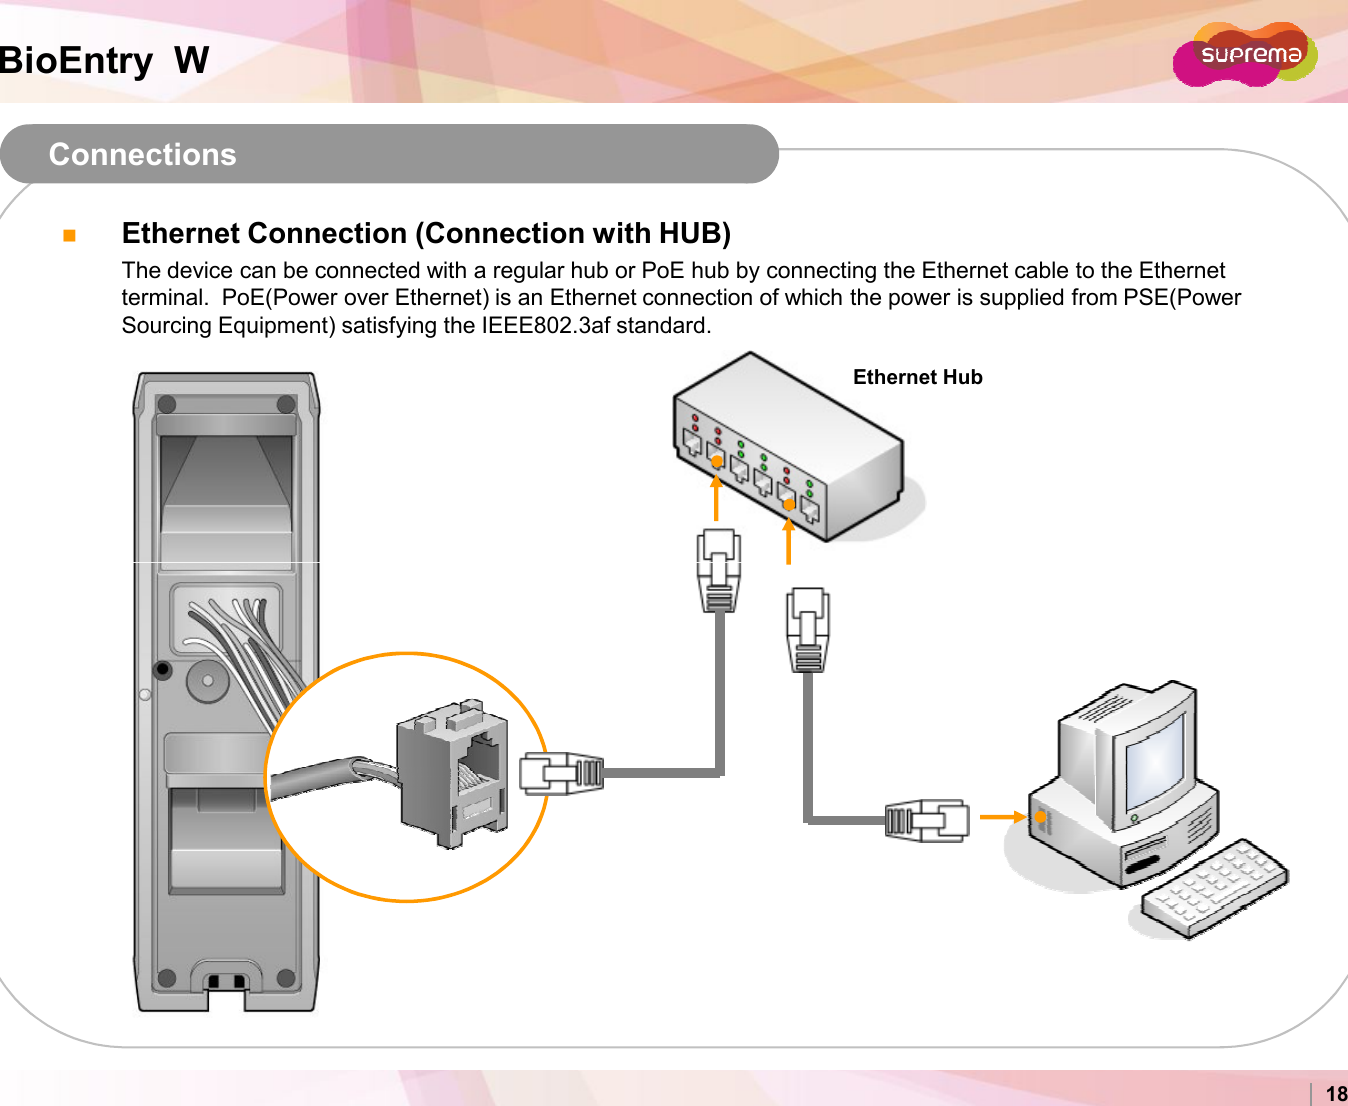 BioEntry  WConnectionsEthernet Connection (Connection with HUB)The device can be connected with a regular hub or PoE hub by connecting the Ethernet cable to the Ethernet terminal.  PoE(Power over Ethernet) is an Ethernet connection of which the power is supplied from PSE(Power Sourcing Equipment) satisfying the IEEE802.3af standard.Ethernet HubCopyright 2007 Suprema Inc. 18